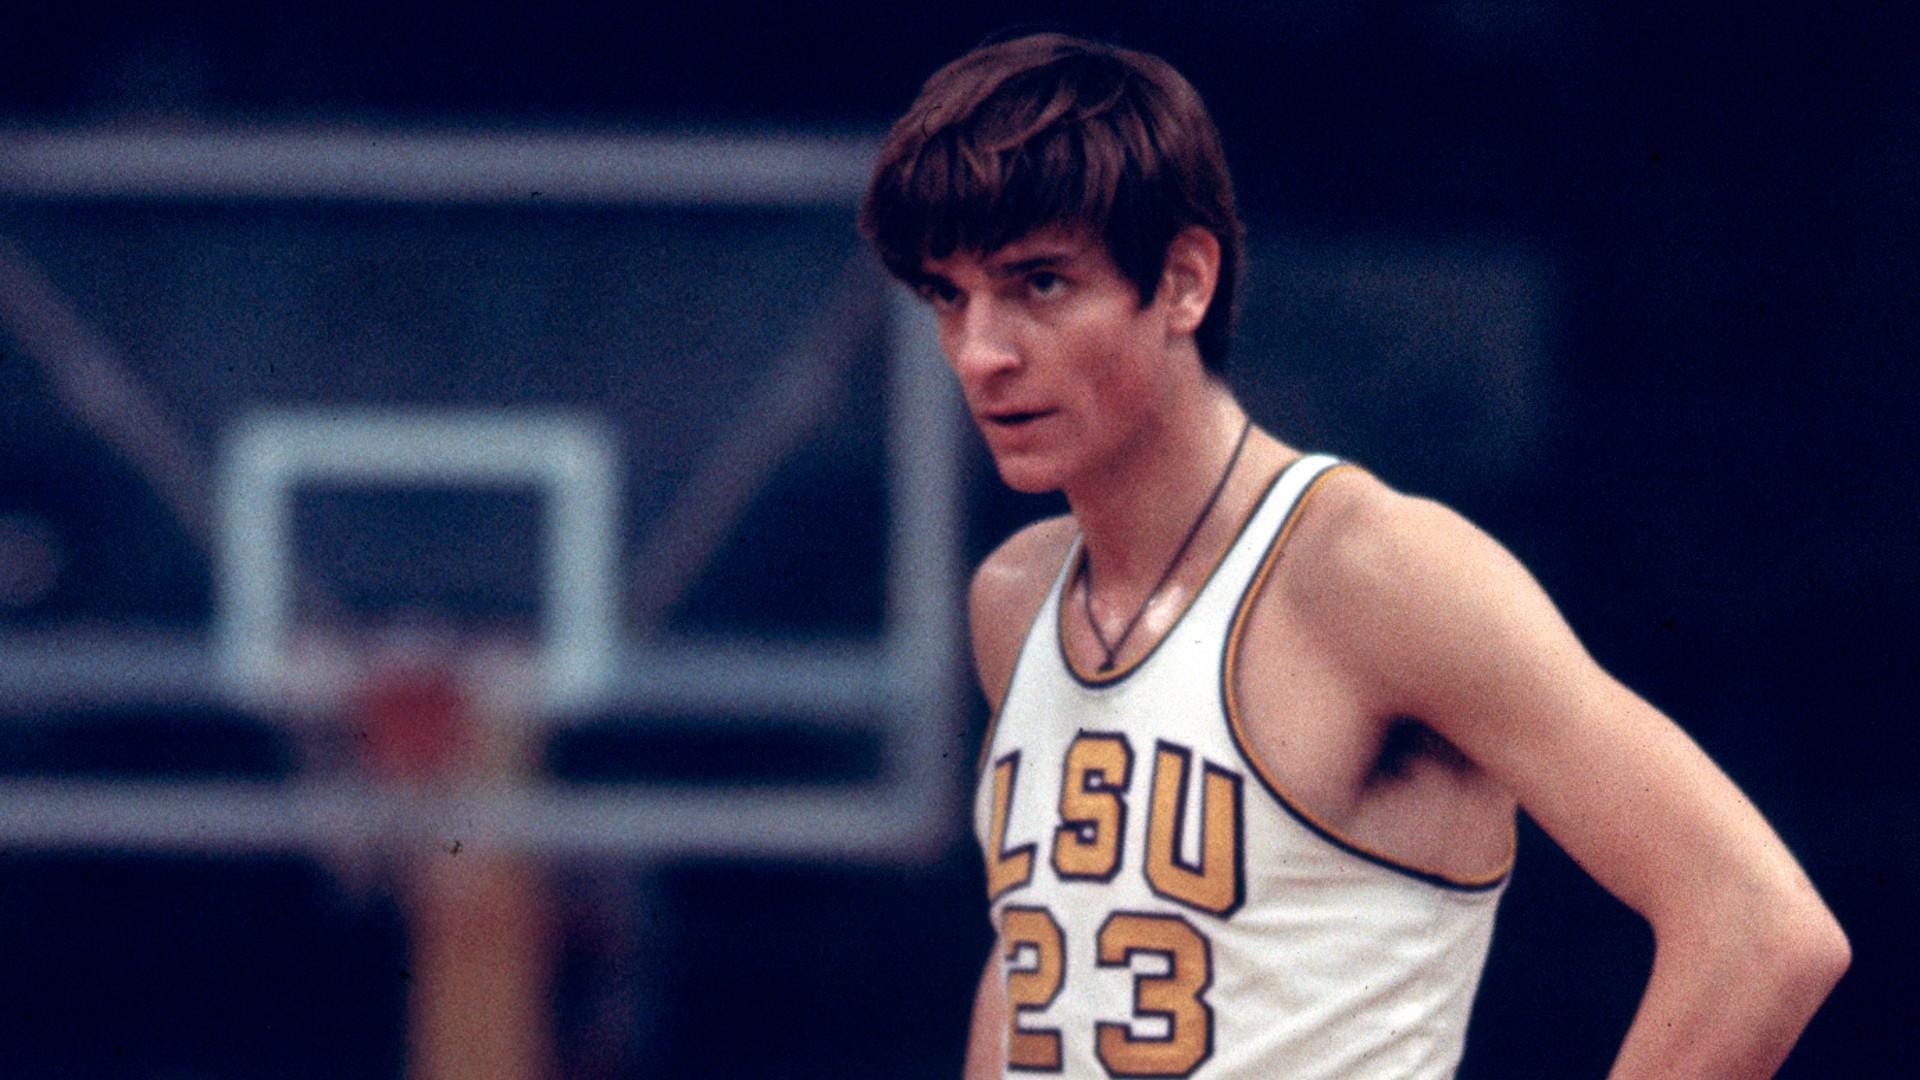 The outrageous and irreplicable college career of Pistol Pete Maravich